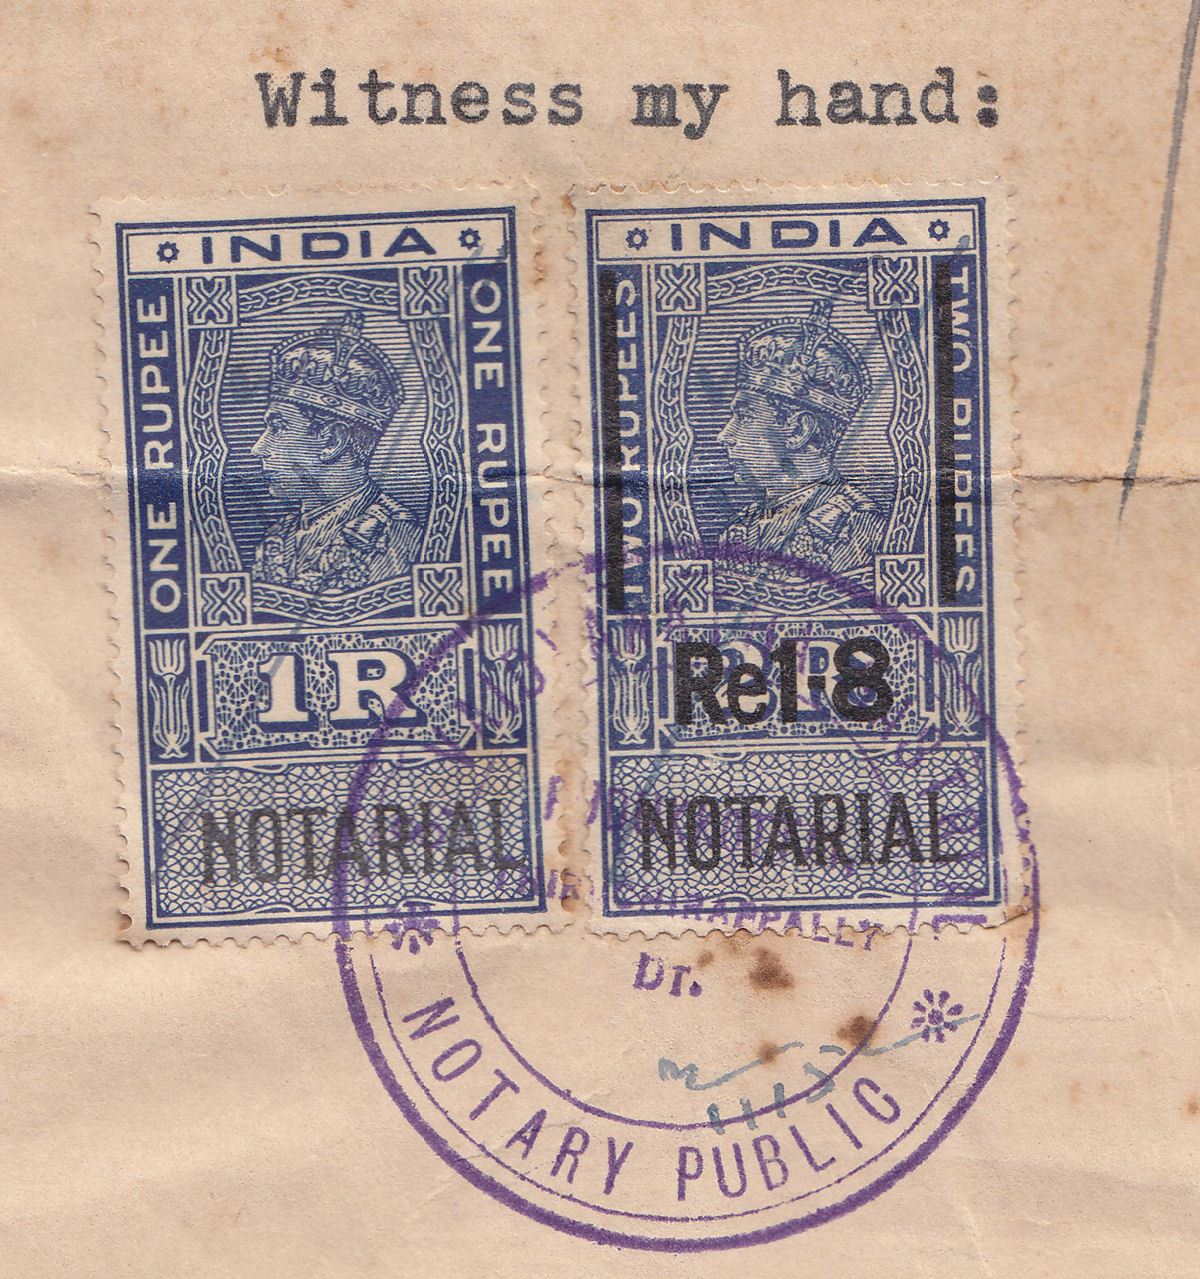 India 1952 Revenue Notarial 1r8 Surcharge on 2r + 1r Used Part Notary Document